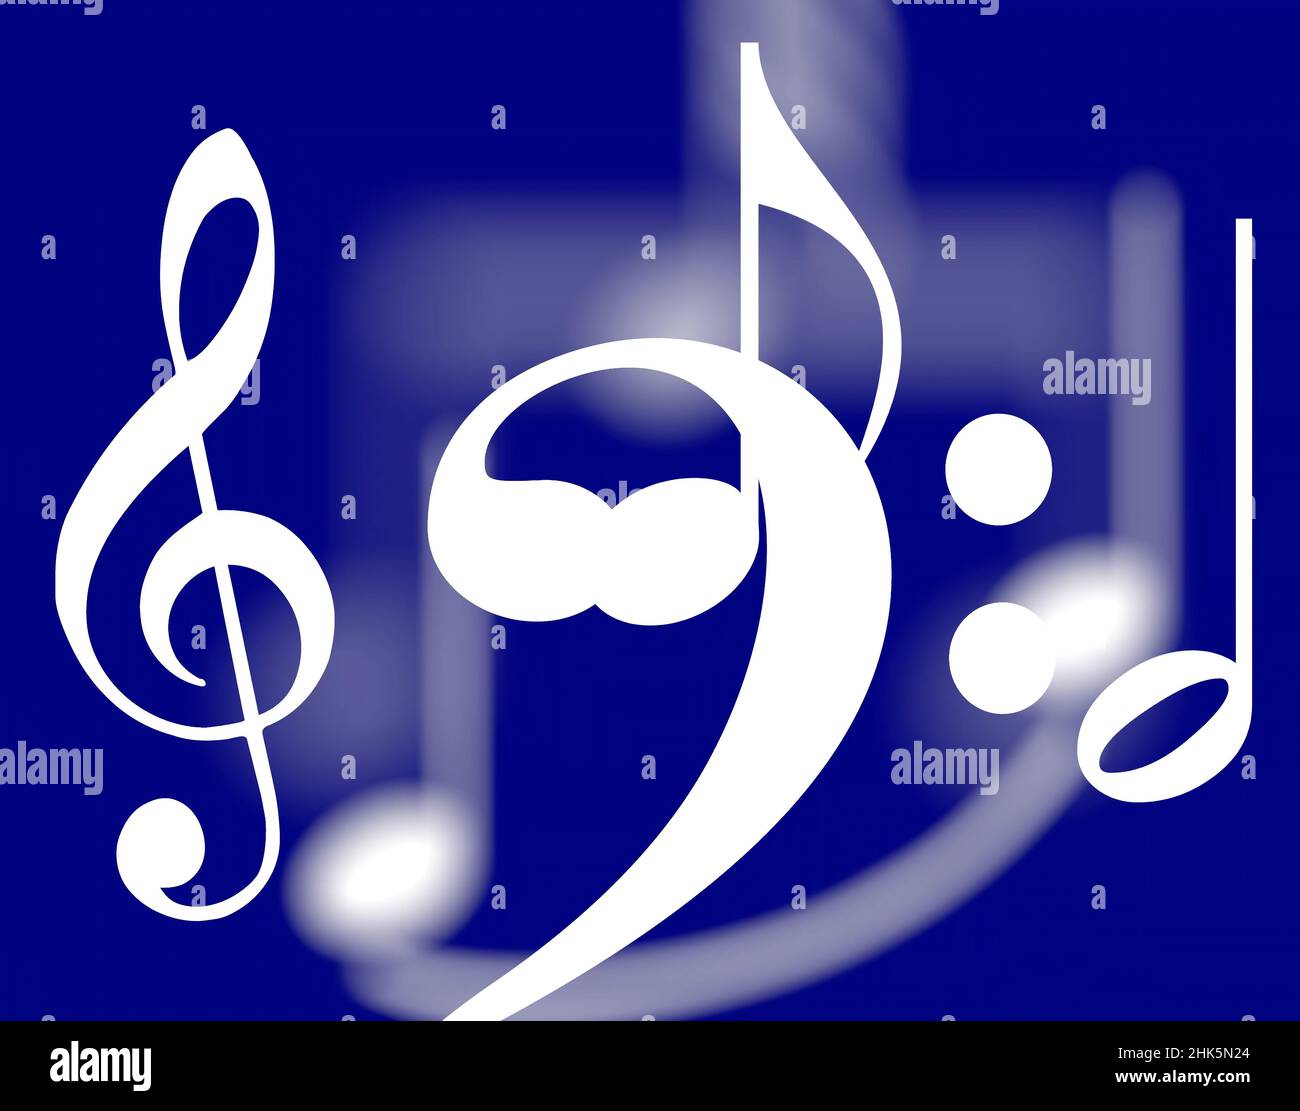 Musical notes and symbols, some in focus and some blurred in the distance. White on blue. Stock Photo